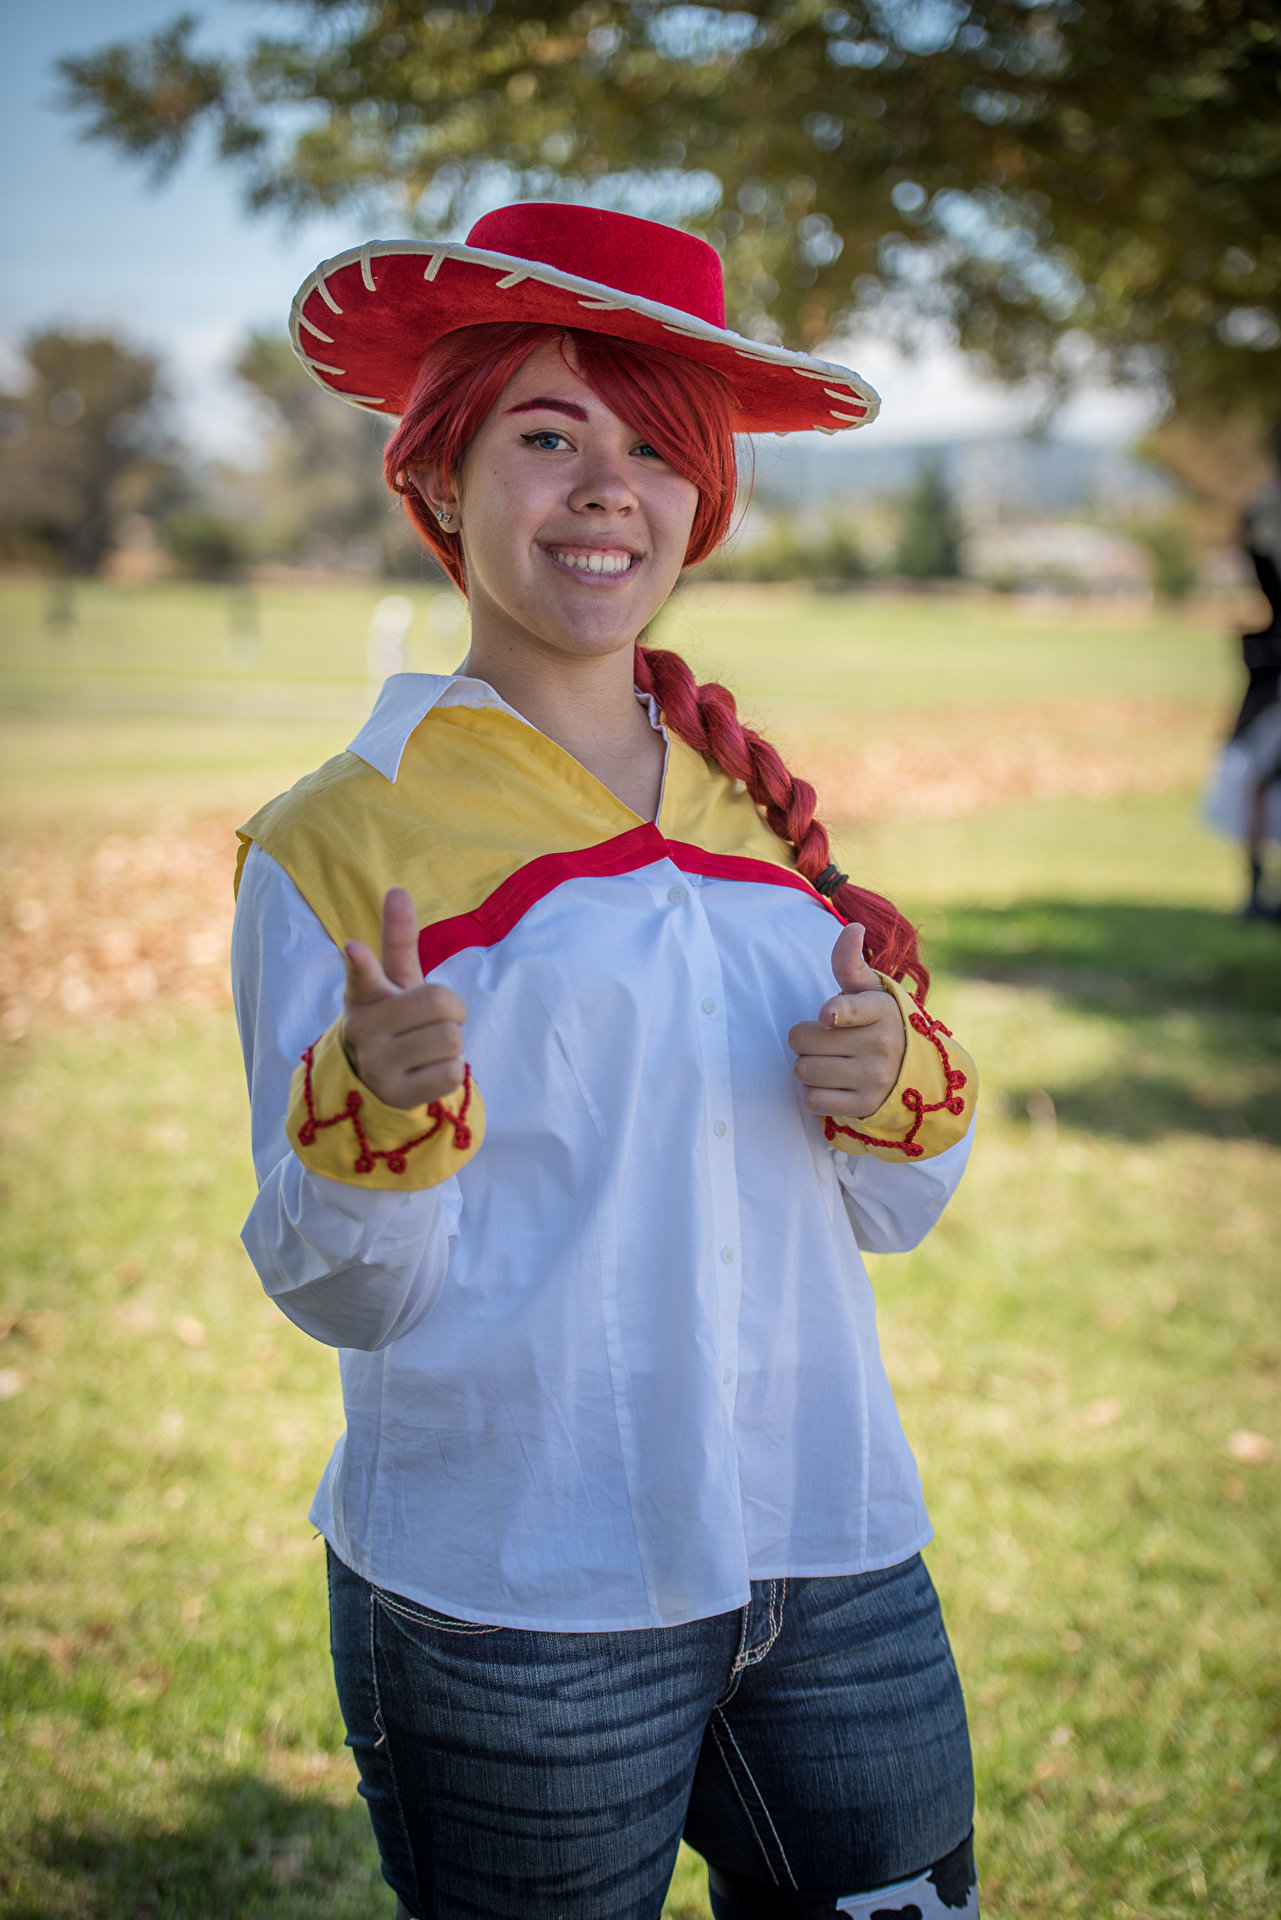 Cospix.net photo featuring Chad Cosplay